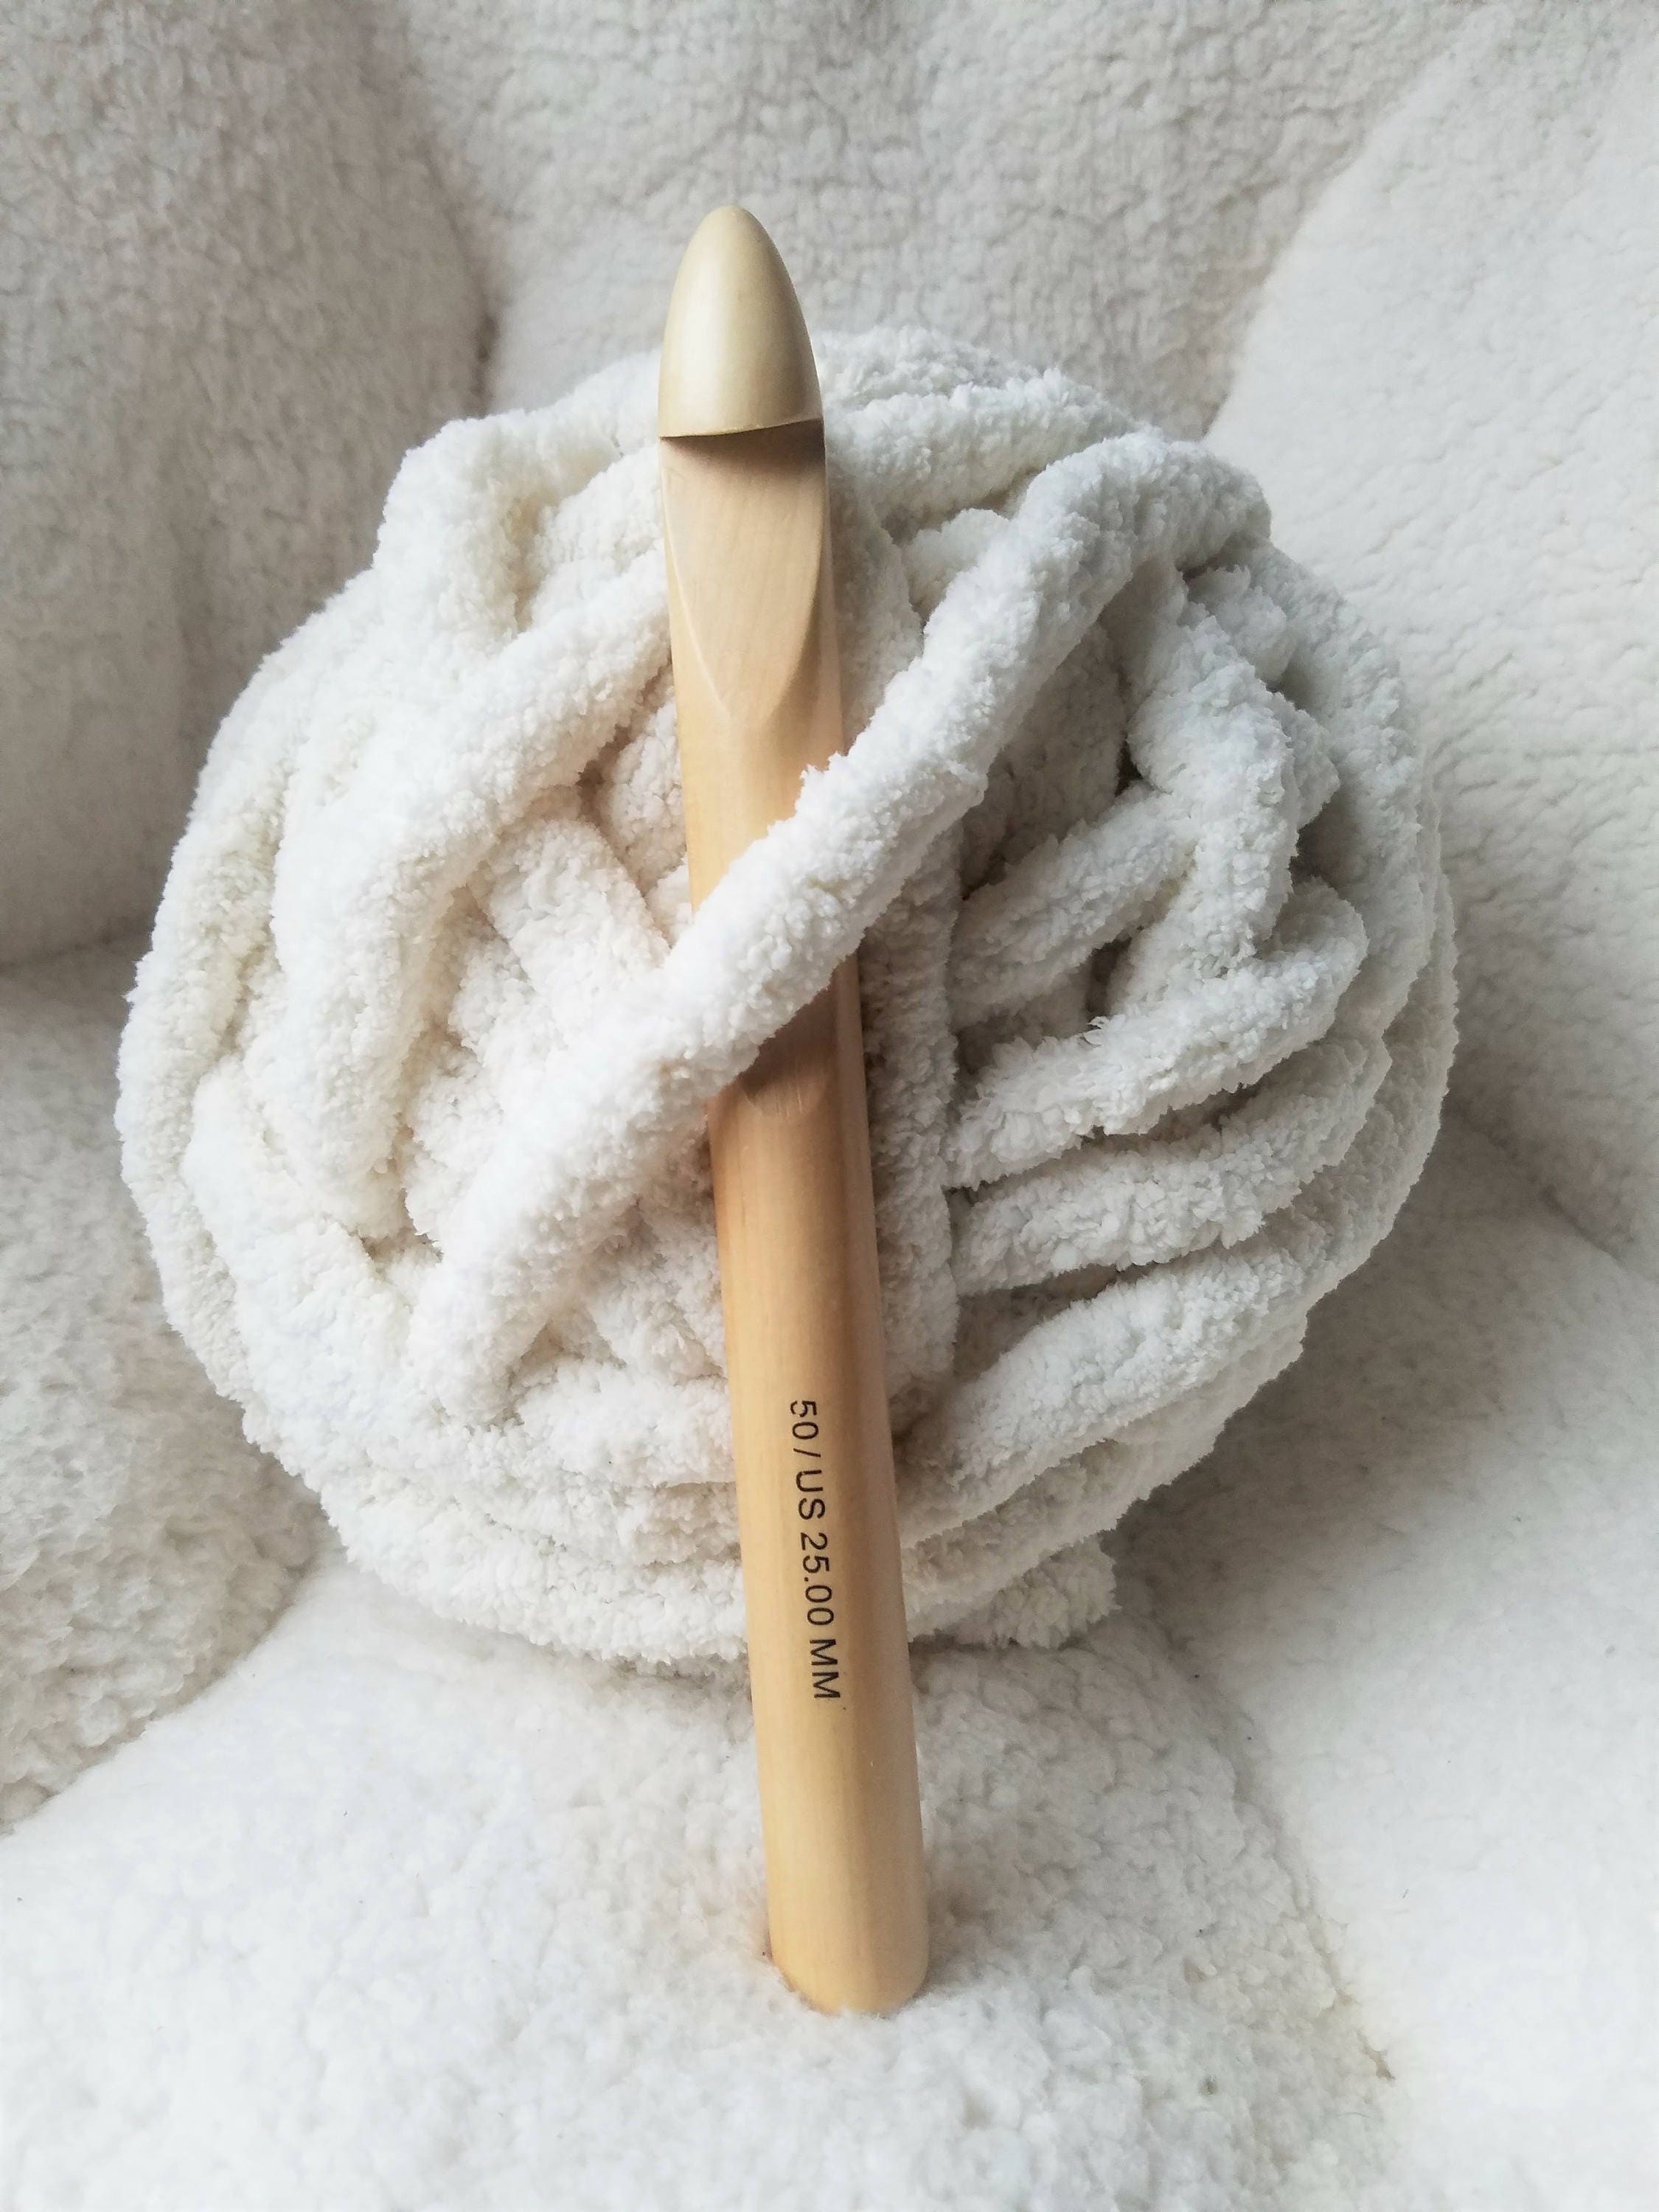 US 80 Size 40 Mm 1,6''/4 Cm Giant Circular Knitting Needles With Silicon  Tube. Big Wooden Needles for Extreme Knitting. 